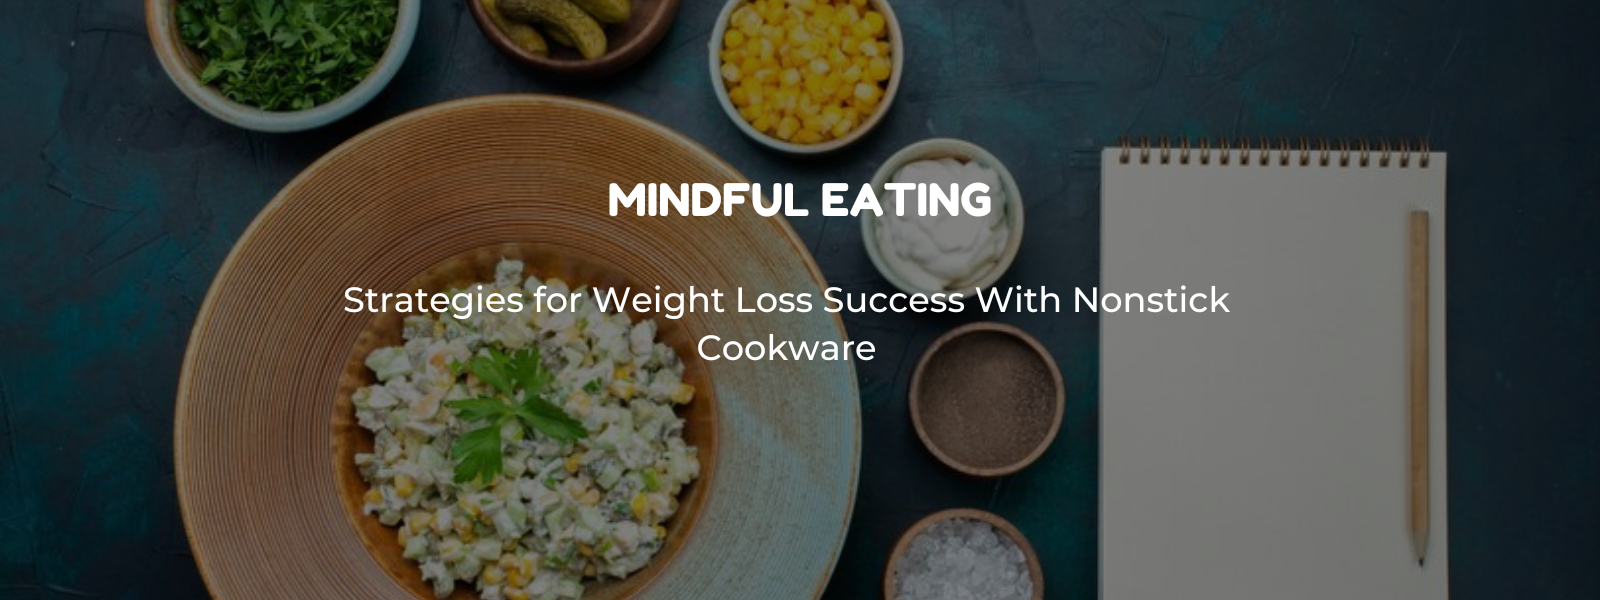 Mindful Eating with Nonstick Cookware: Strategies for Weight Loss Success